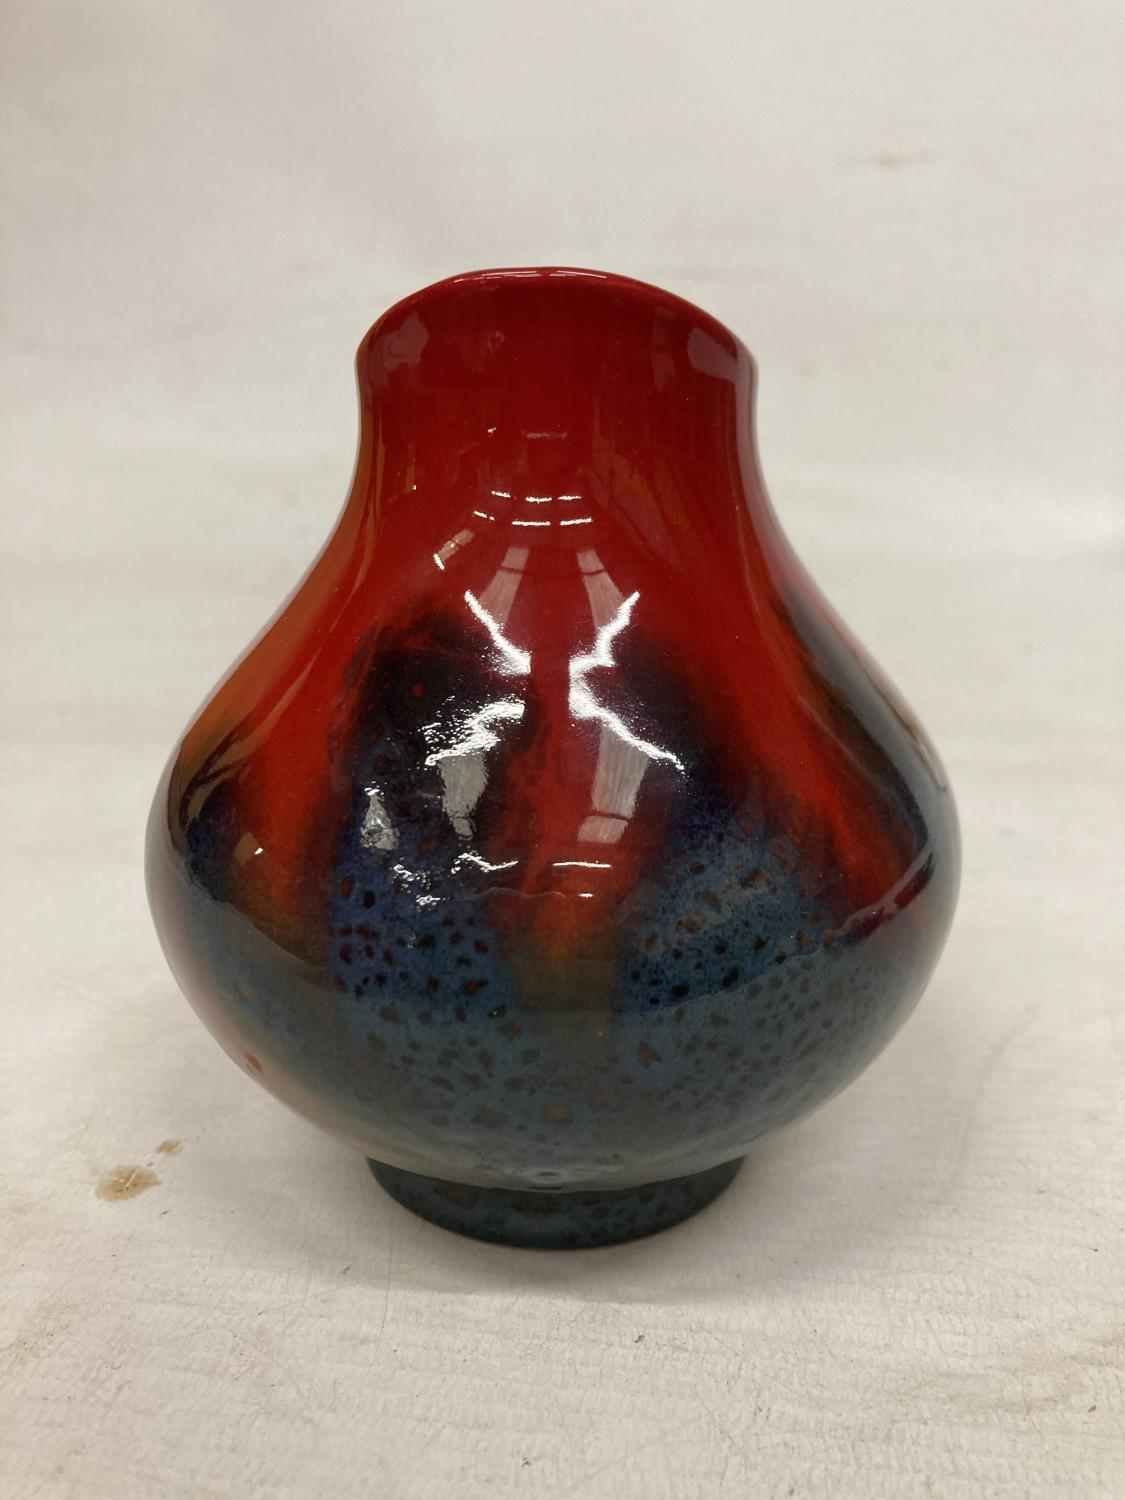 A ROYAL DOULTON FLAMBE VEINED VASE - Image 2 of 6